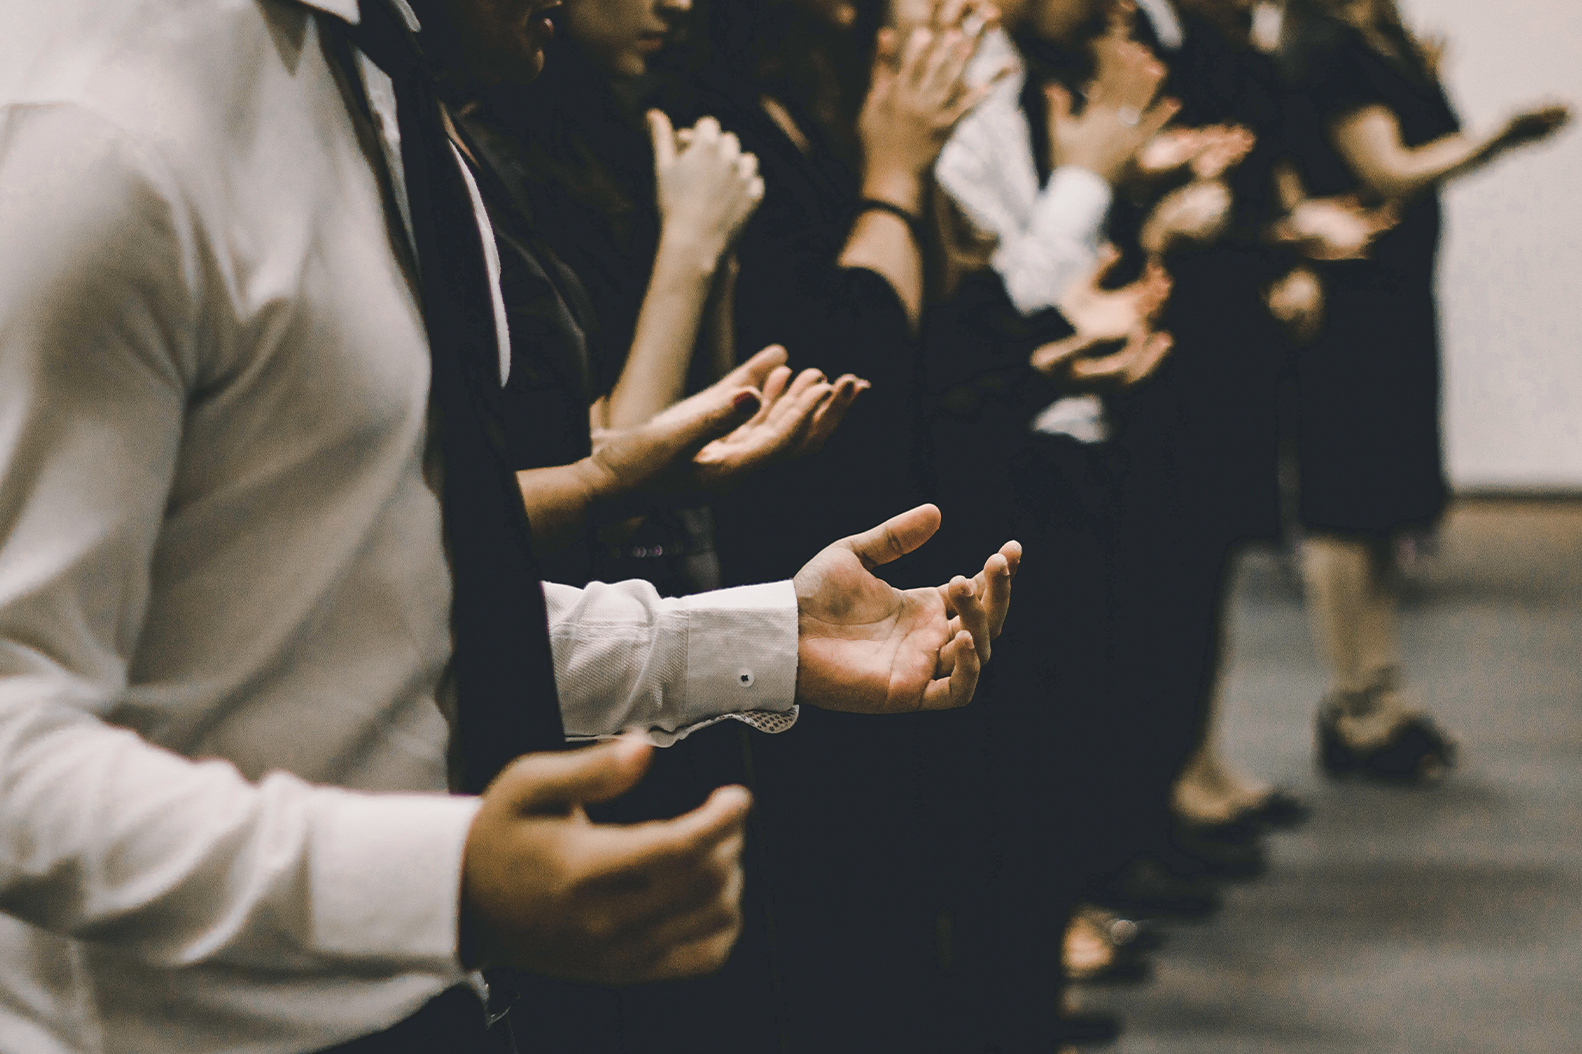 HOW I STARTED A WORKPLACE PRAYER